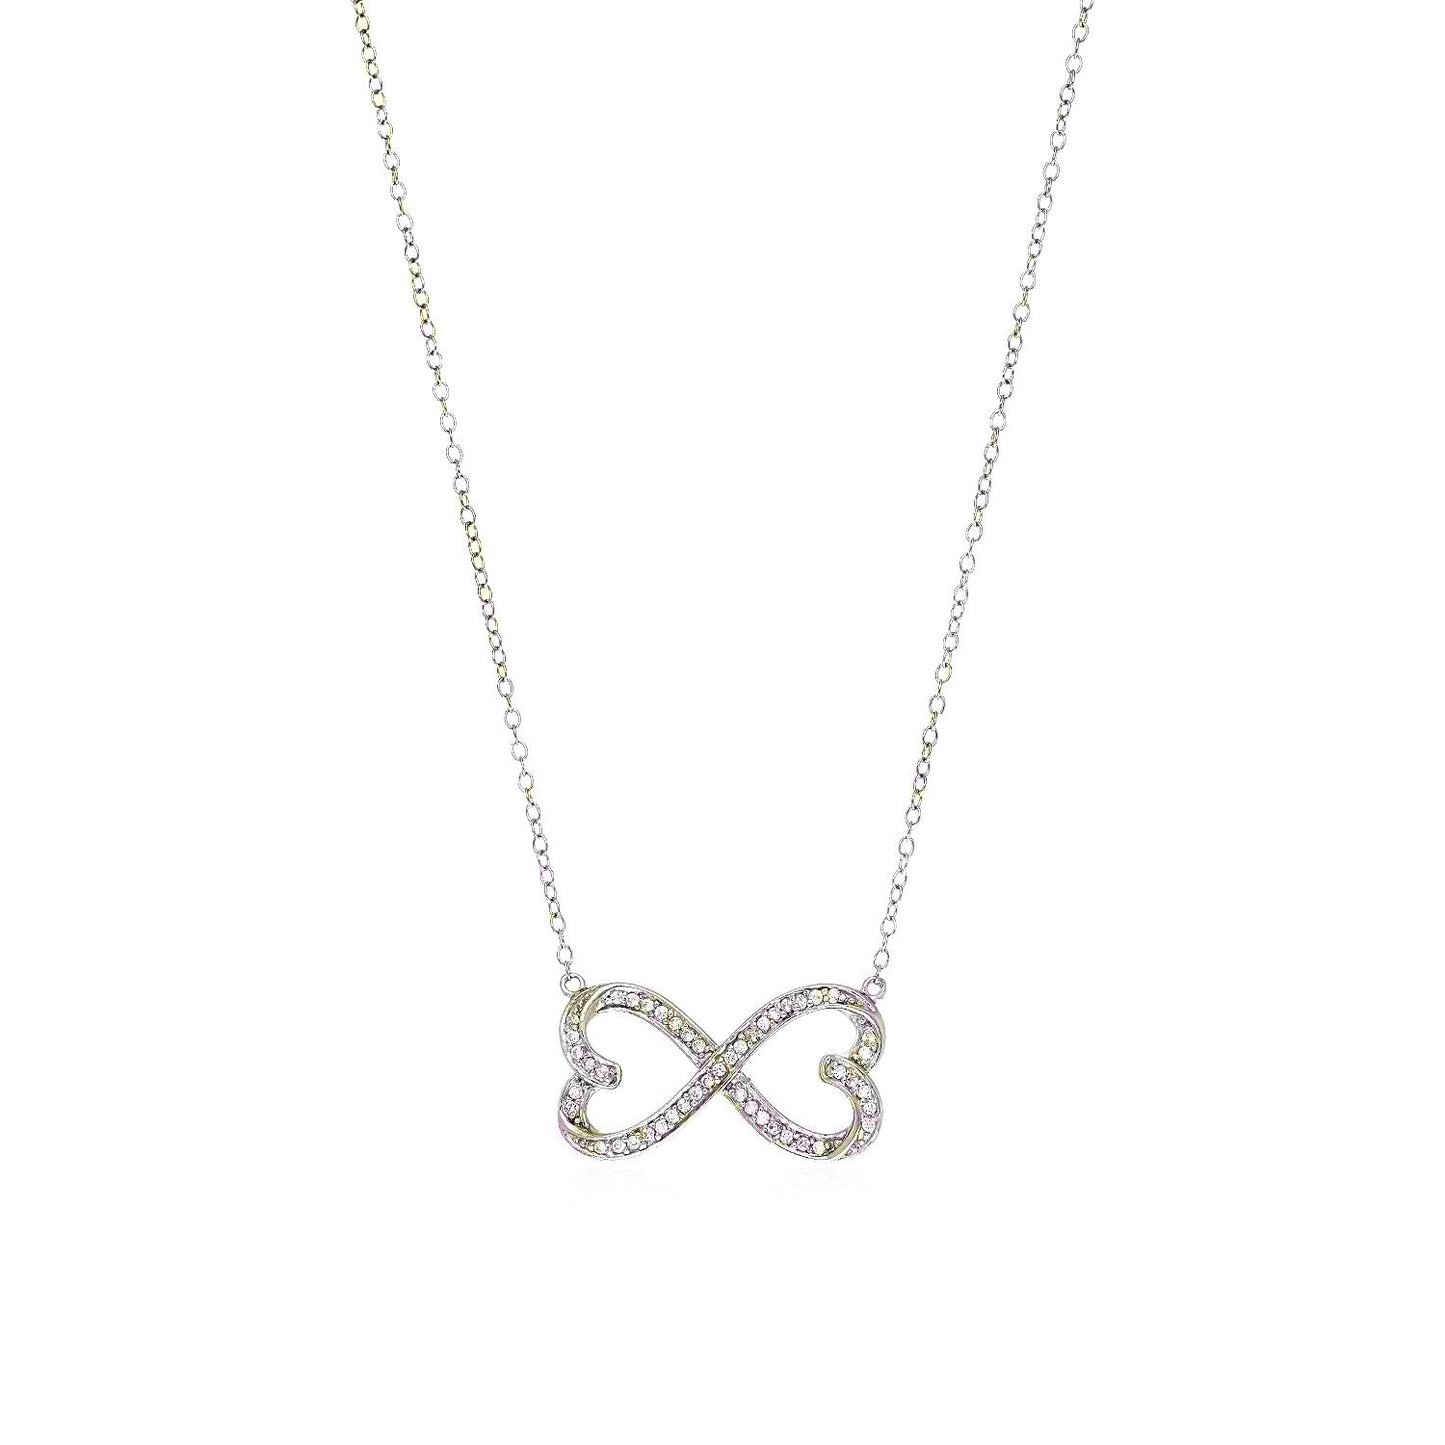 Double Heart Infinity Necklace with Cubic Zirconia in Sterling Silver